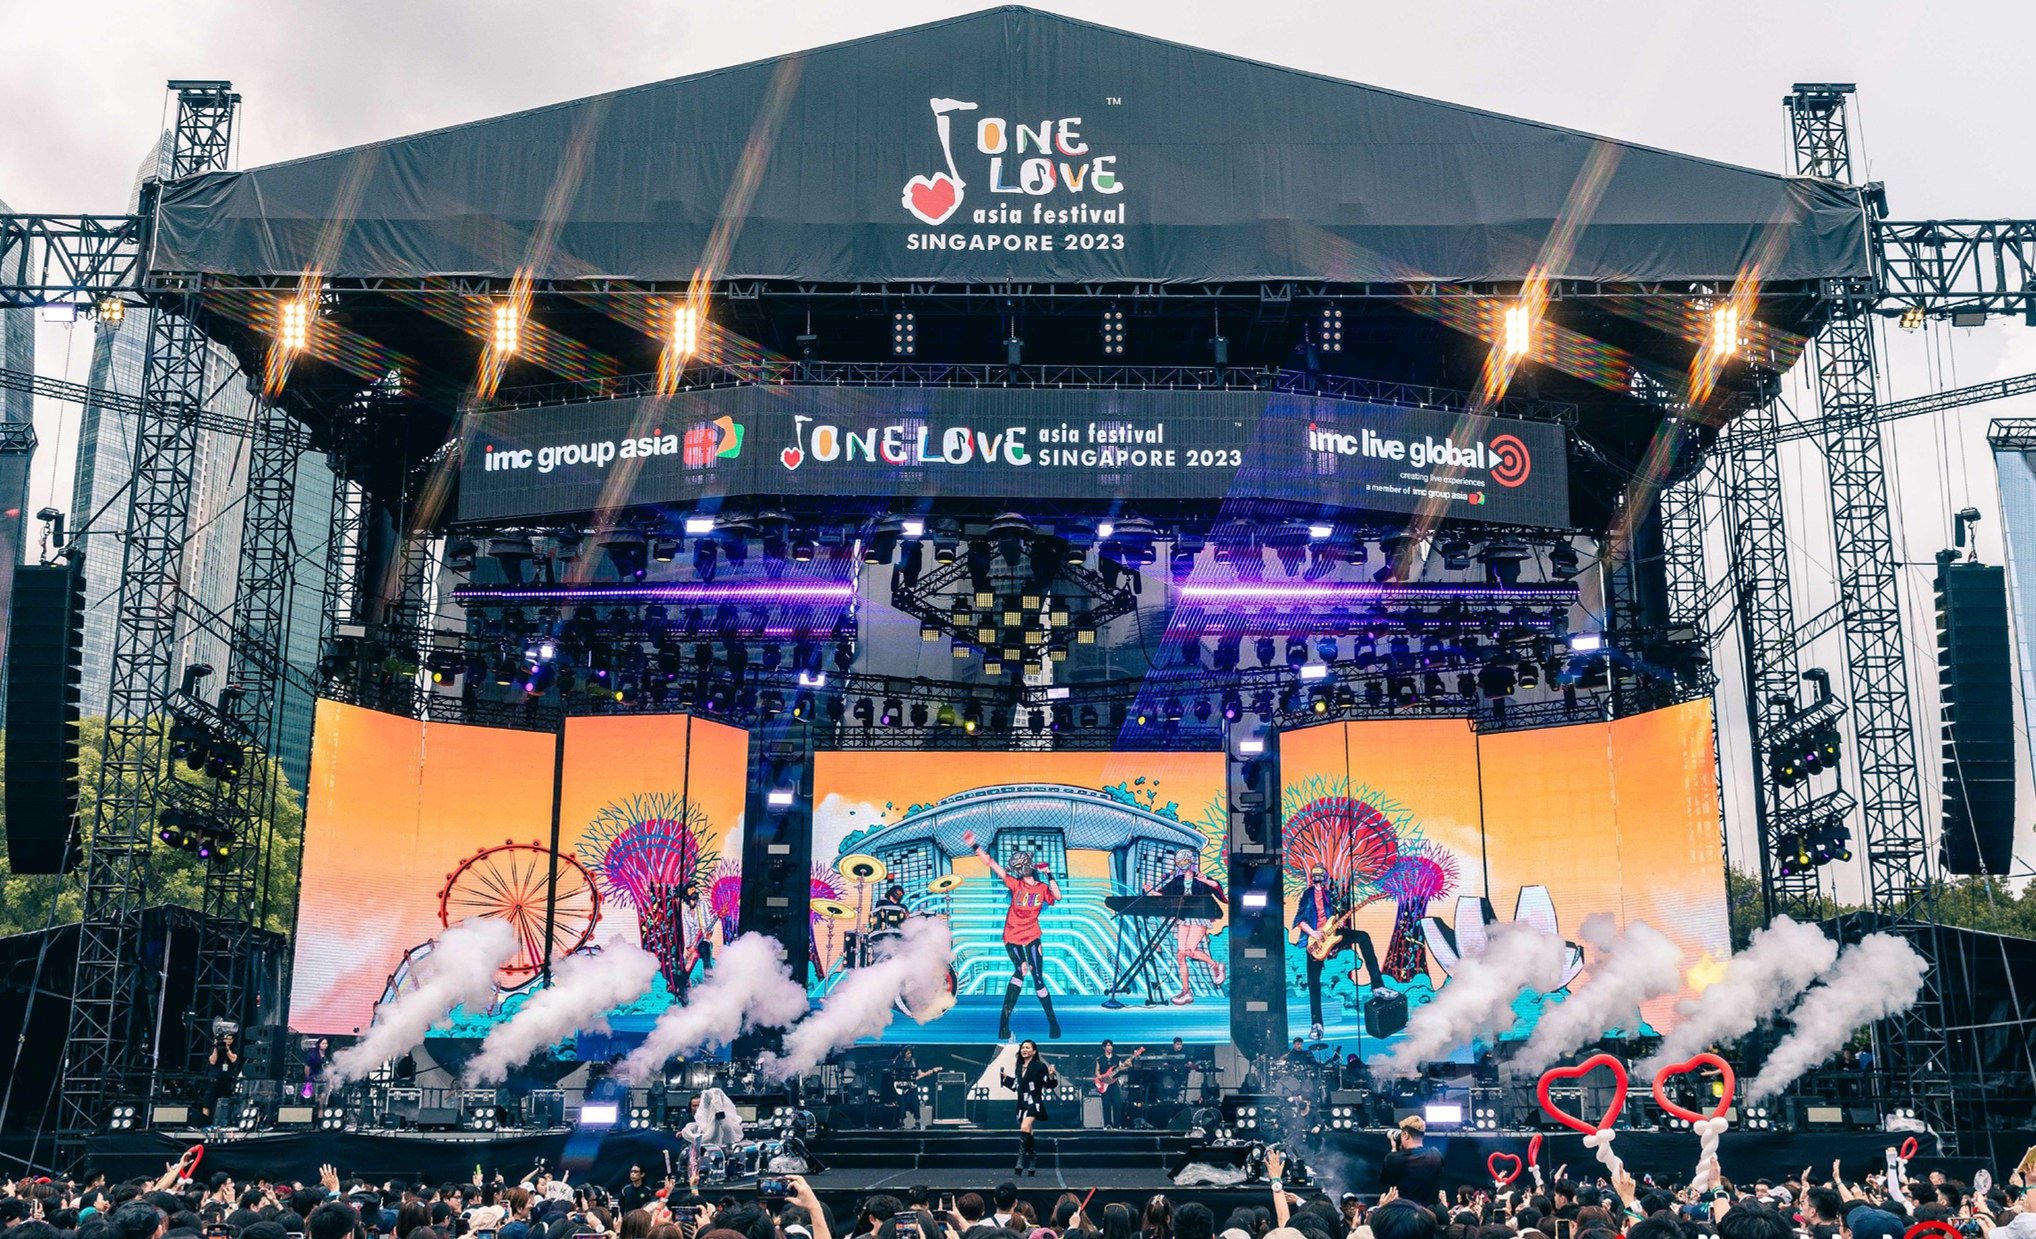 The One Love Asia Festival in Singapore in 2023. The organiser of the Hong Kong event has said it will absorb millions in extra costs. Photo: Facebook/One Love Asia Festival